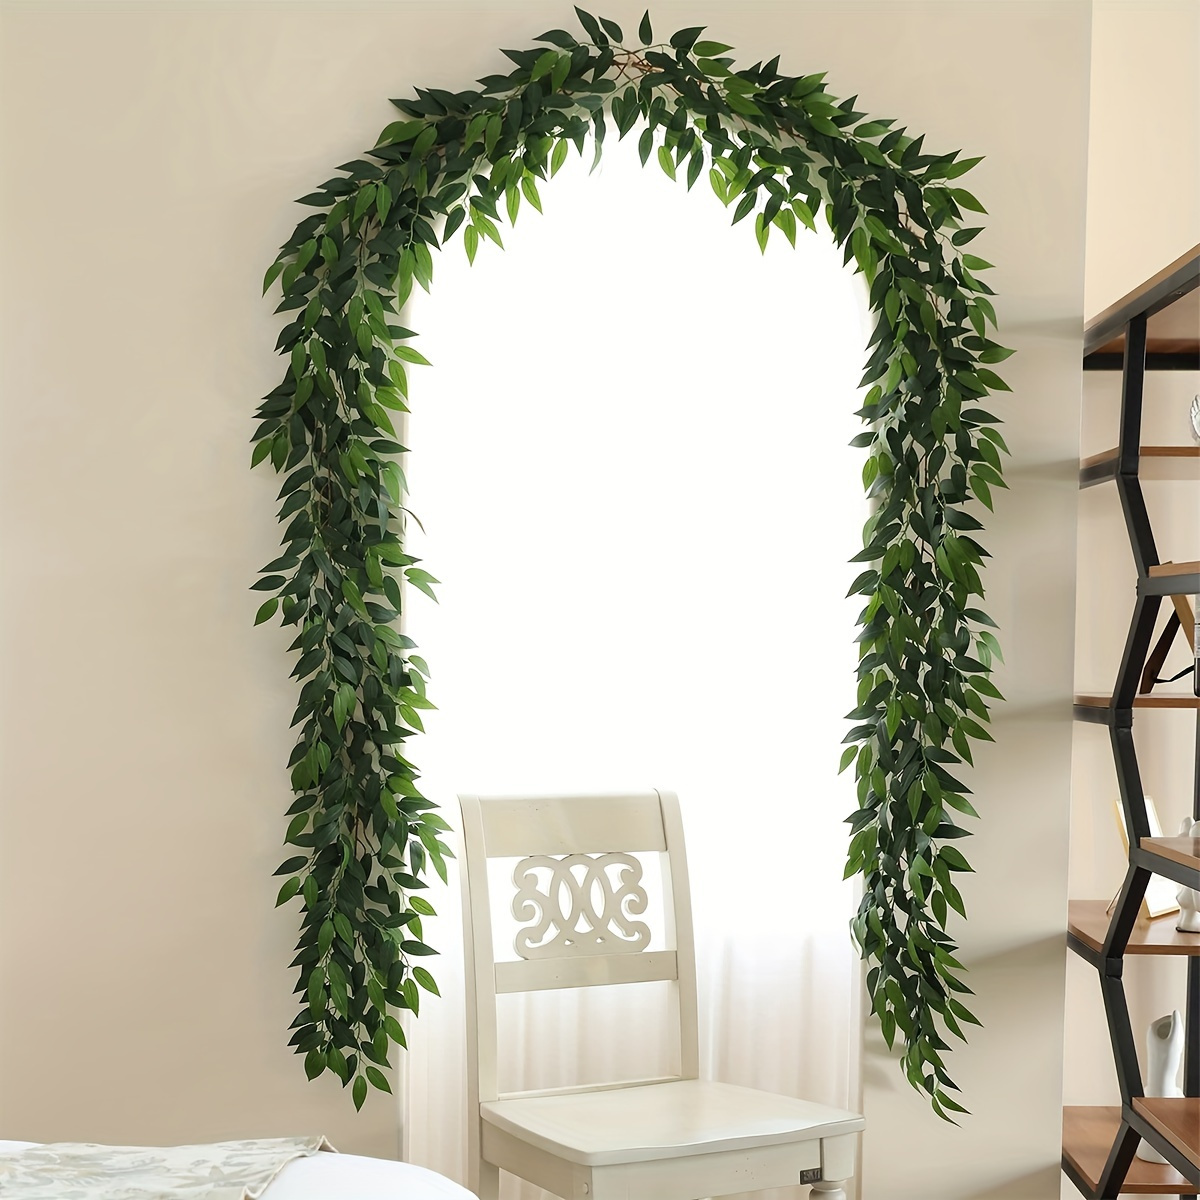 

73" Silk Italian Ruscus Vine Garland - Green Leaves, Perfect For Home, Bedroom, Wall Decor, Parties & Weddings